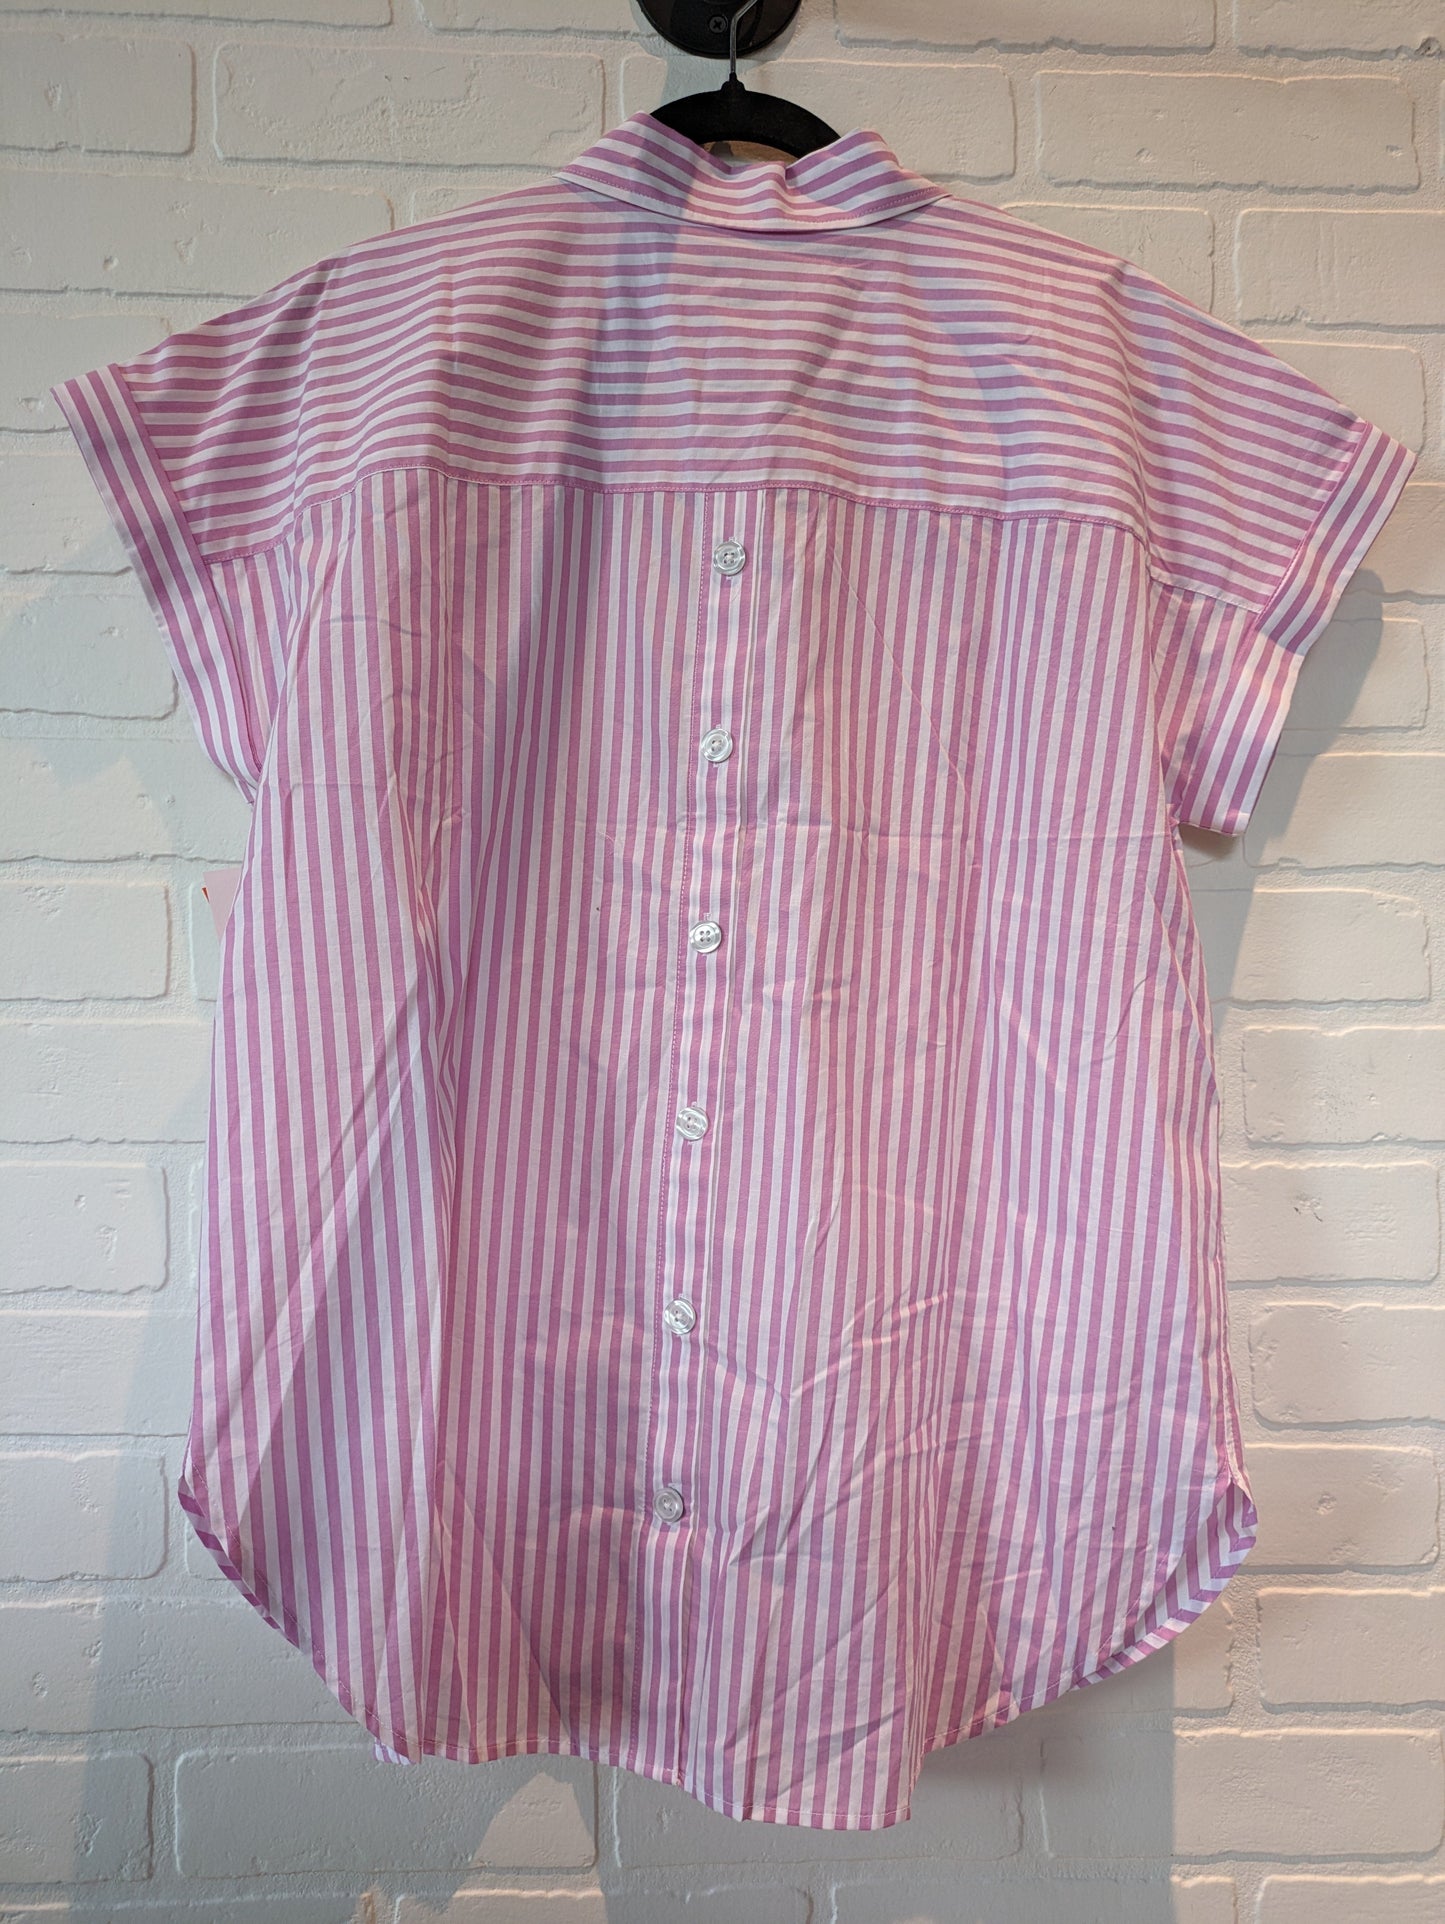 Striped Top Short Sleeve Talbots, Size M